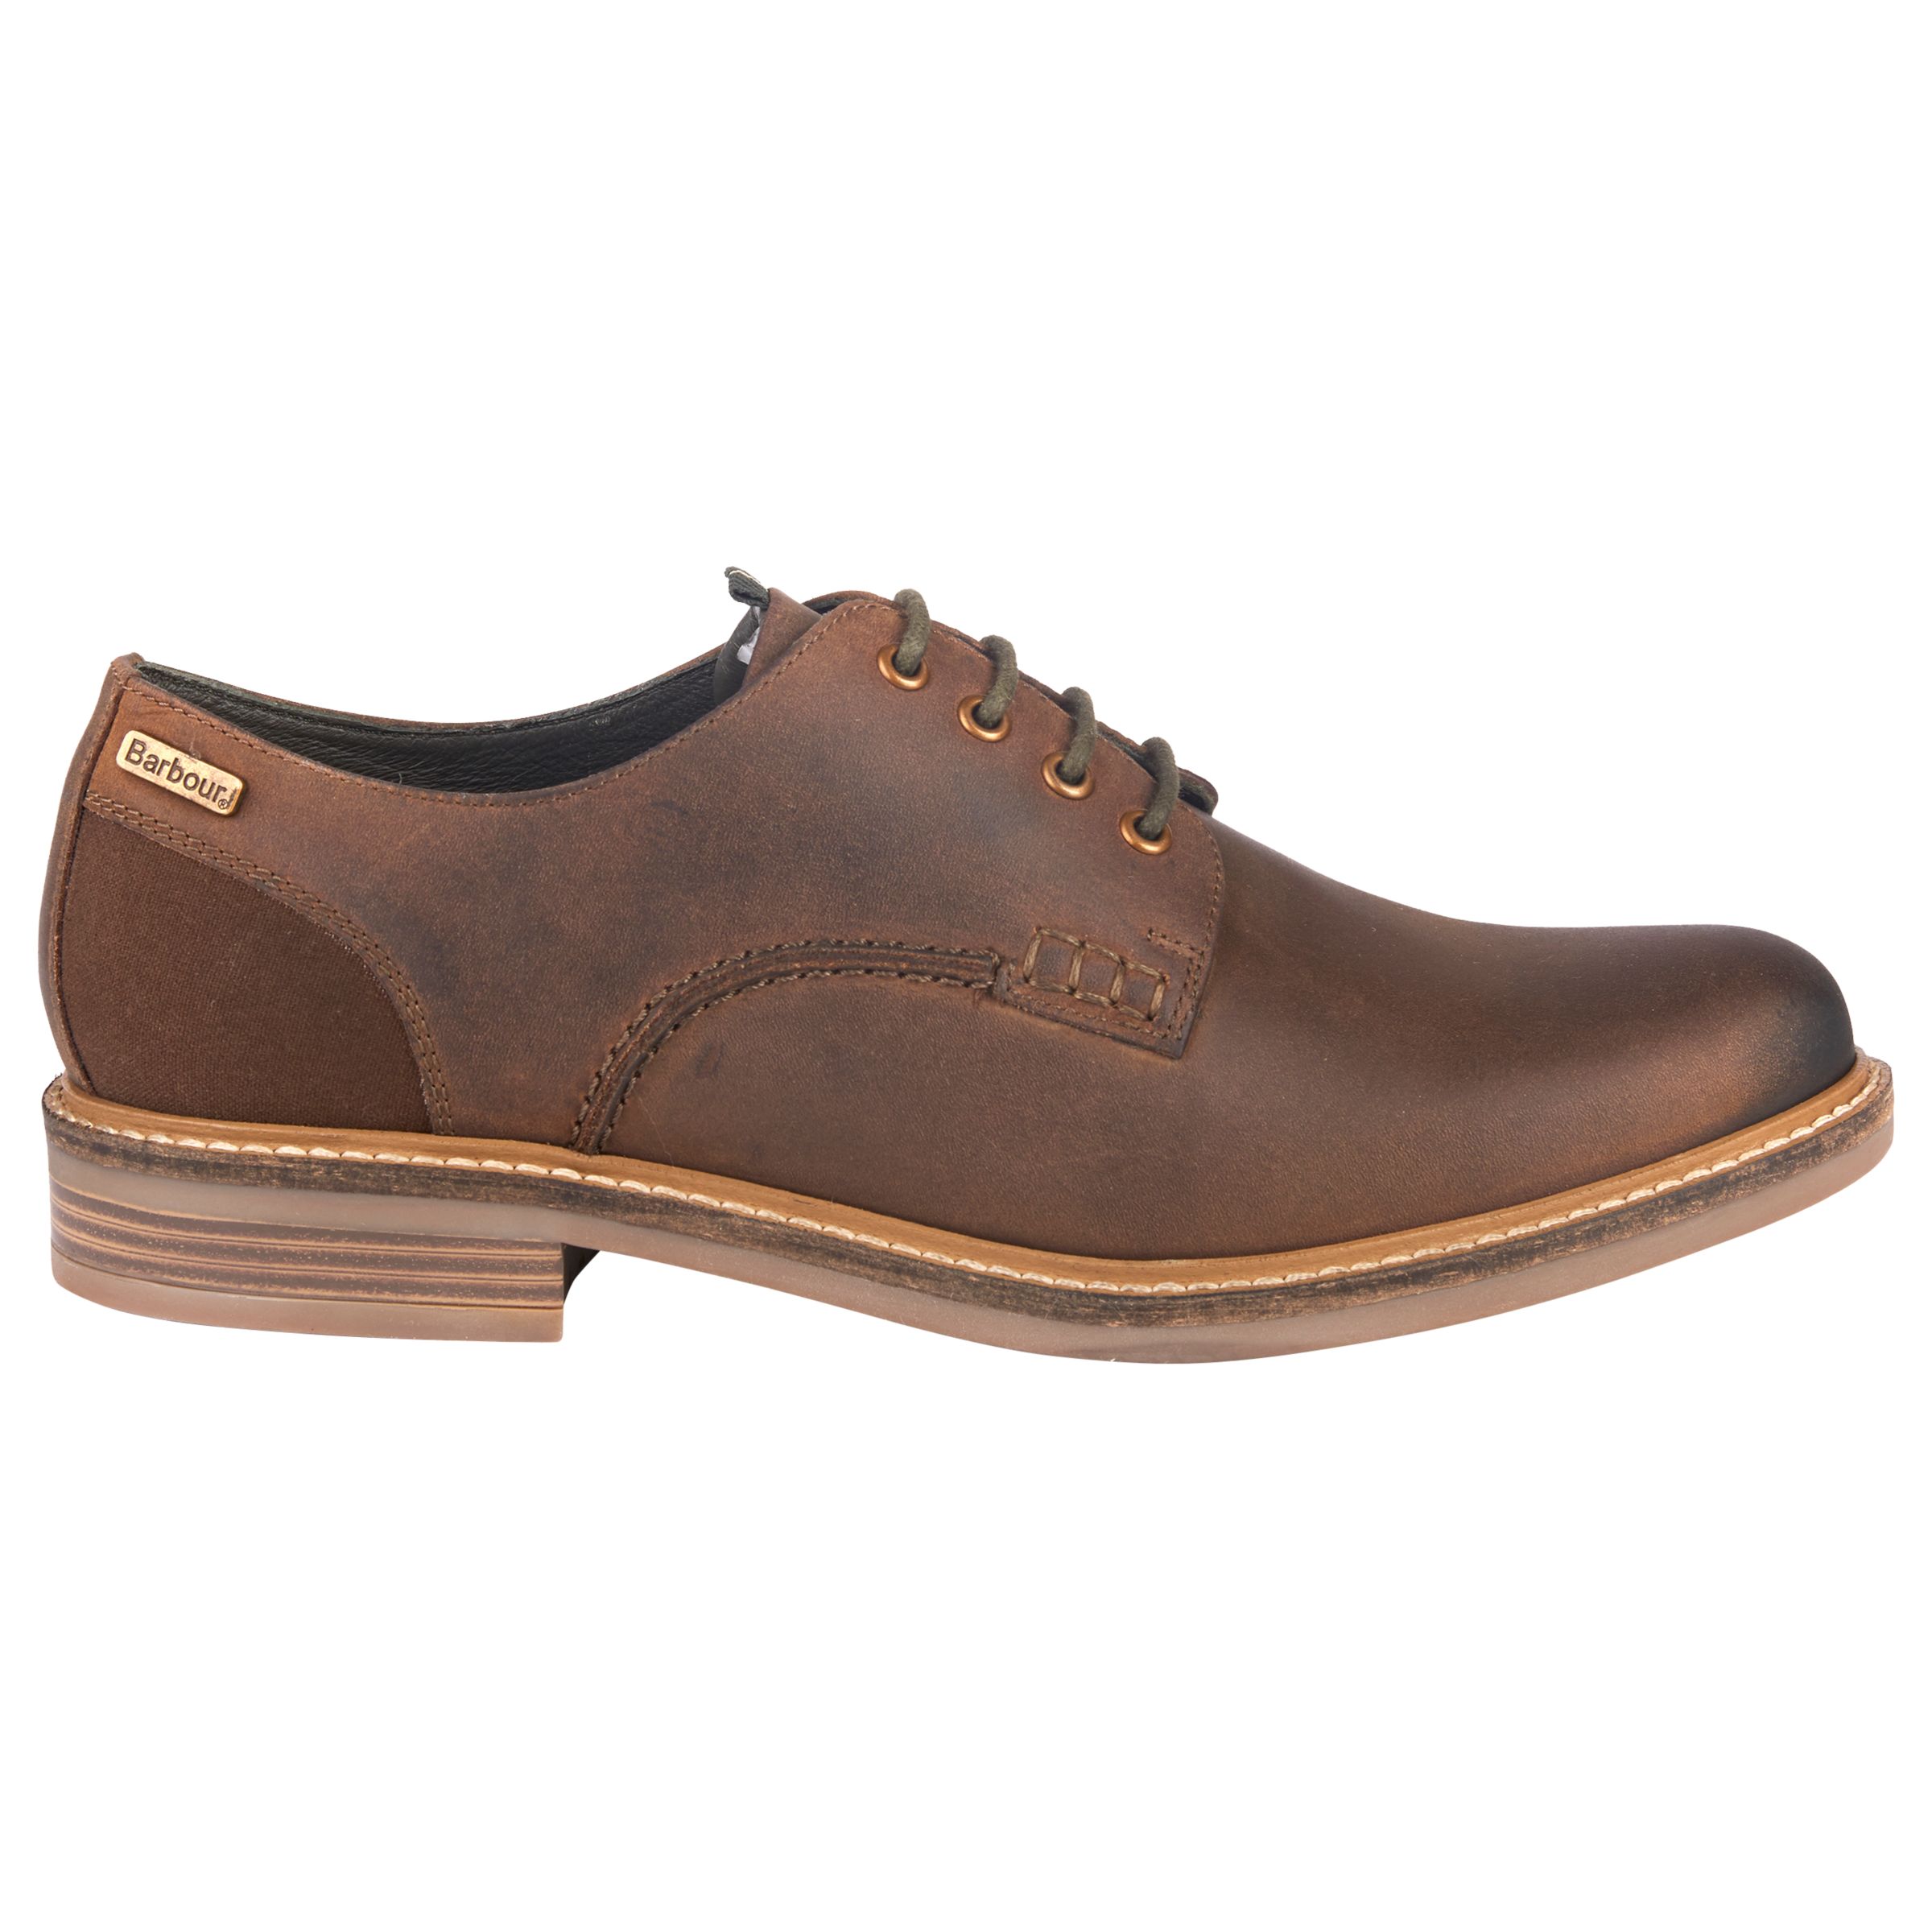 barbour bramley derby shoes